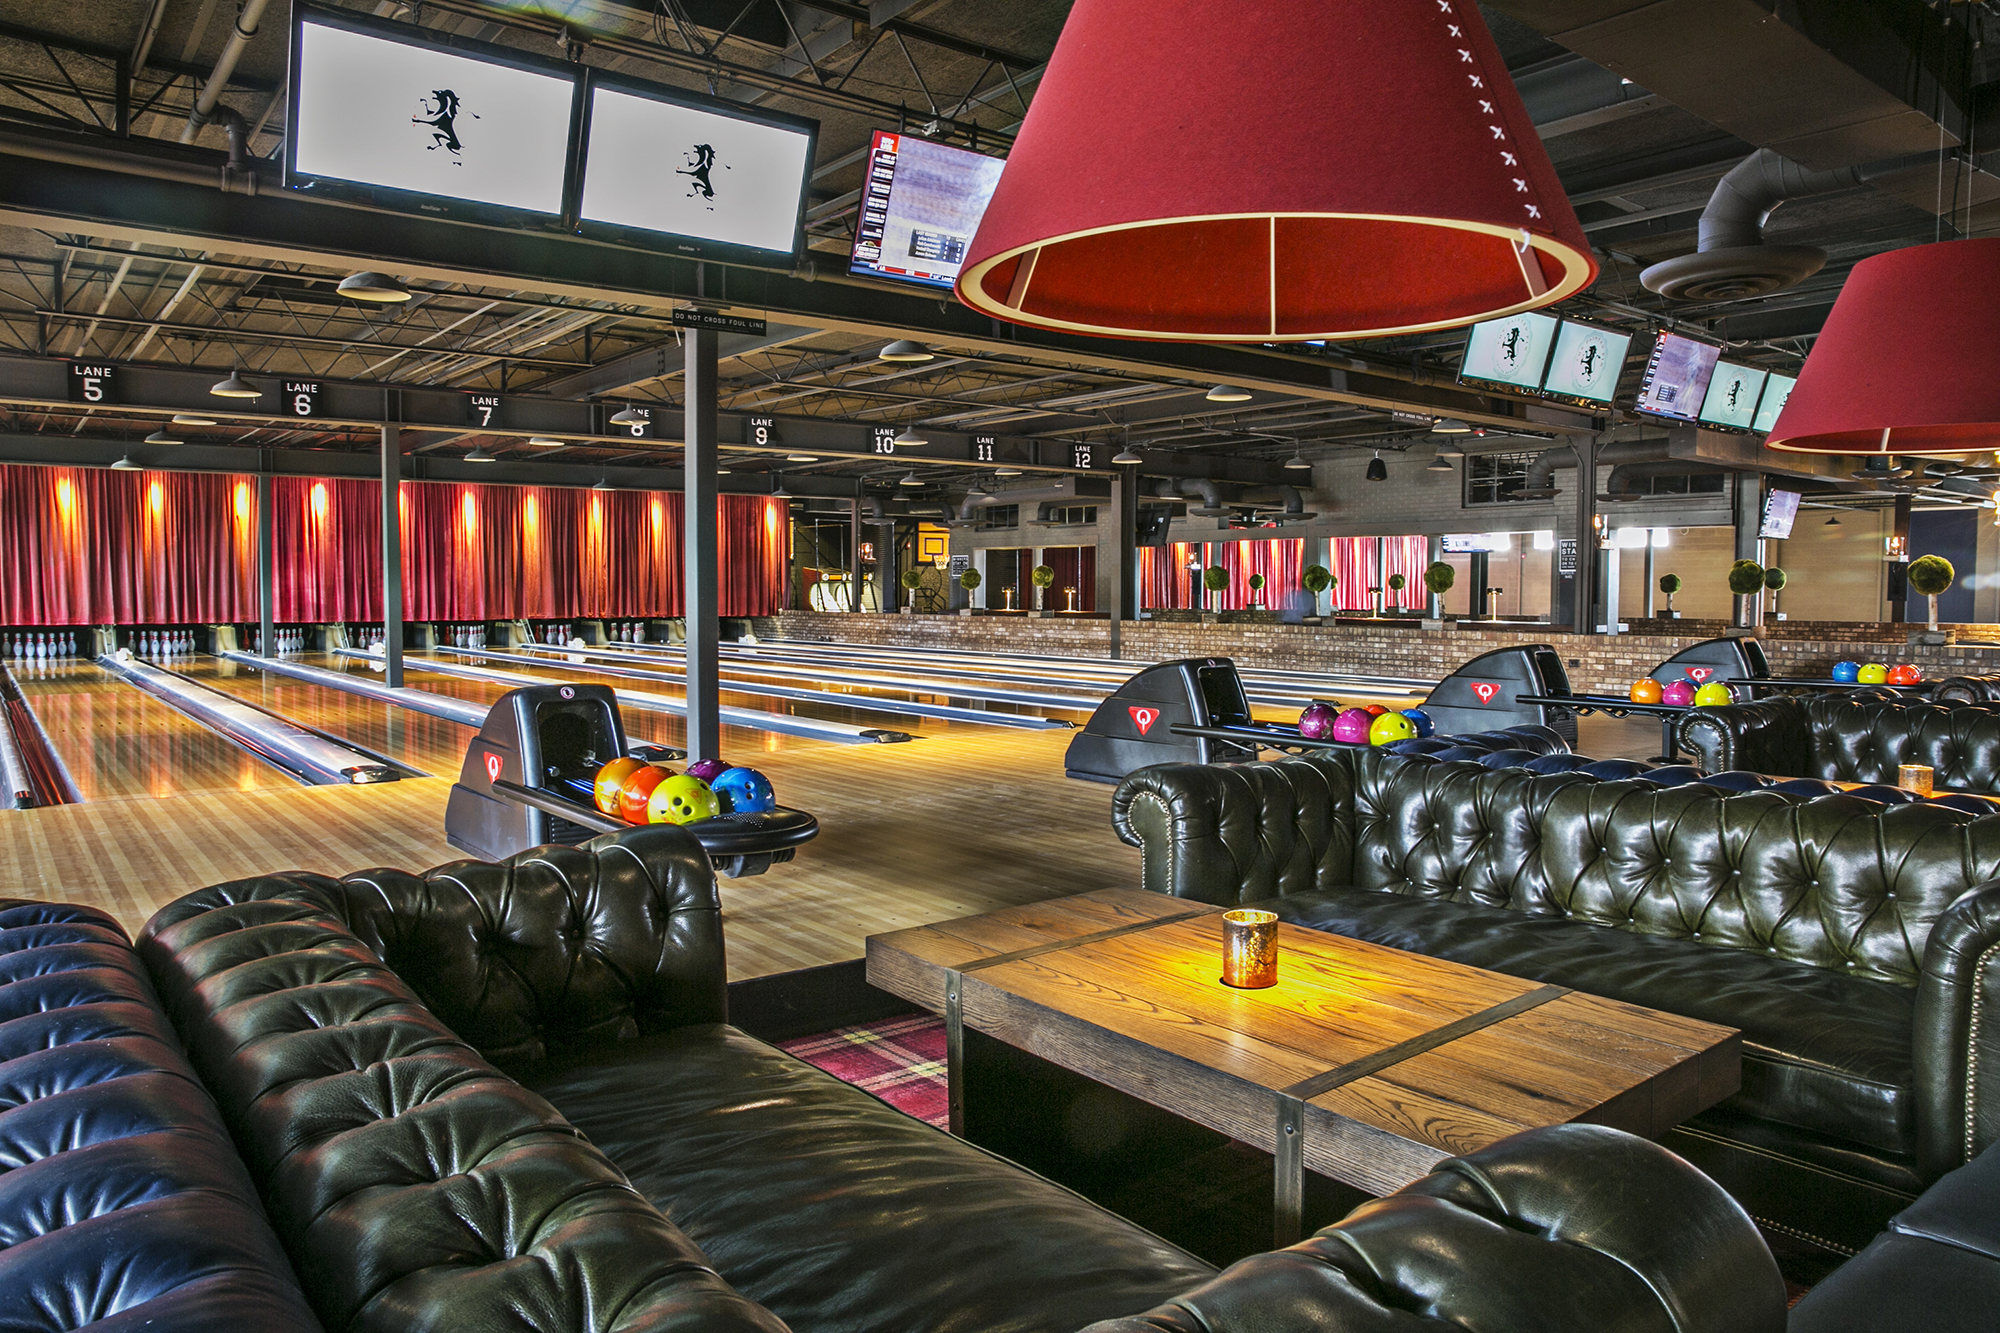 Let the good times roll 7 of the best bowling alleys in metro Atlanta